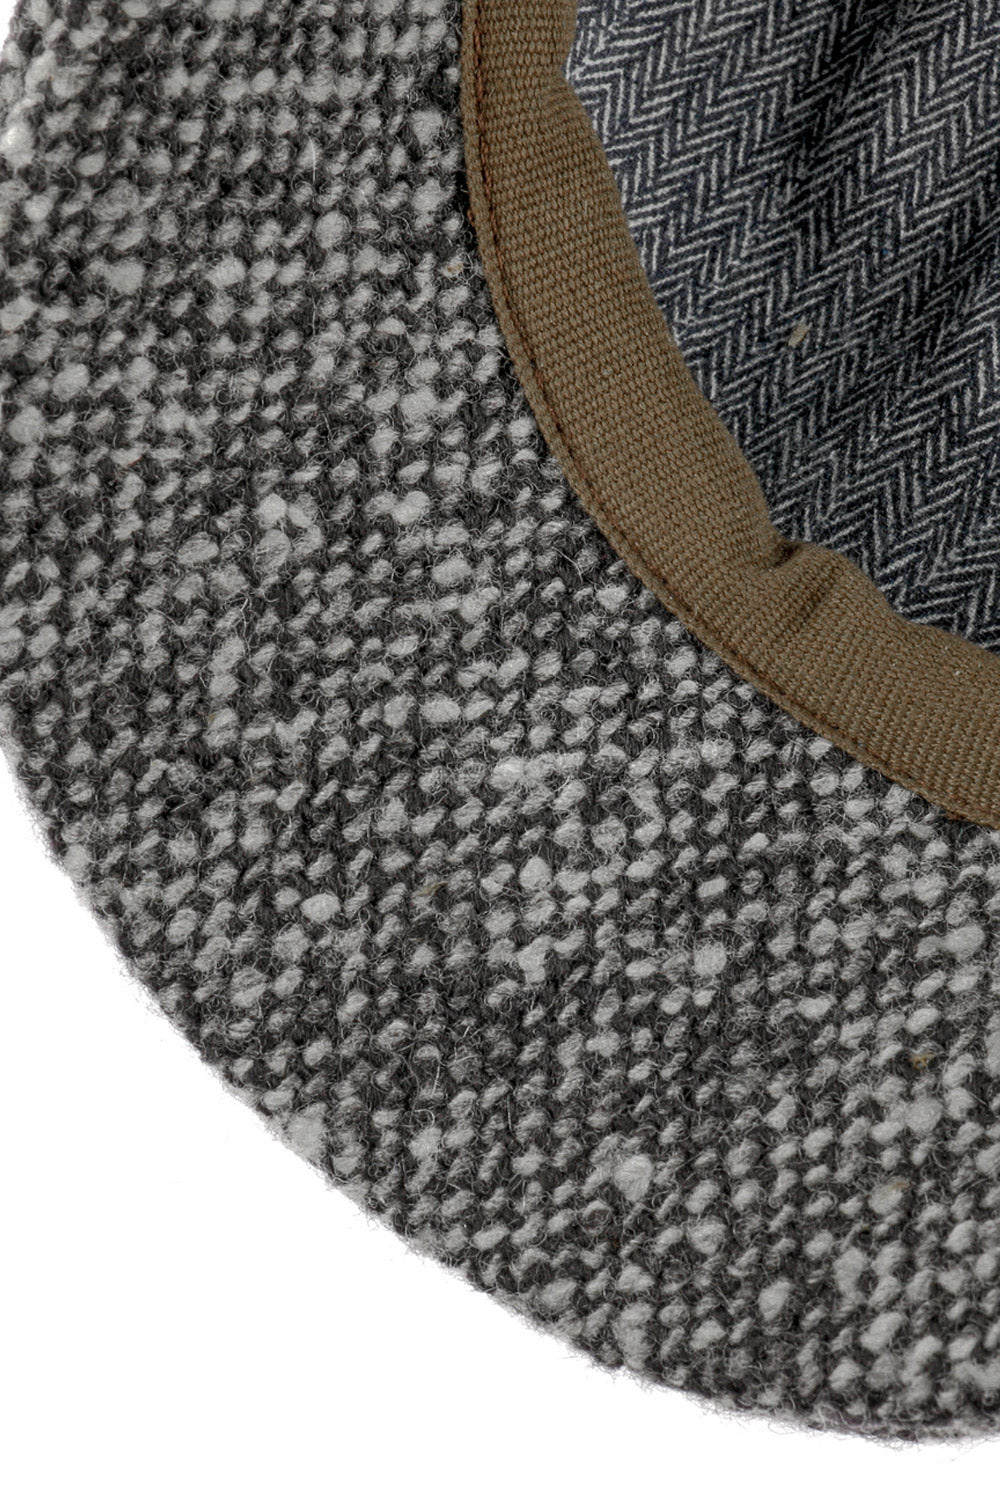 Buy the Stetson Texas Donegal Wool Flat Cap in Grey/White at Intro. Spend £50 for free UK delivery. Official stockists. We ship worldwide.